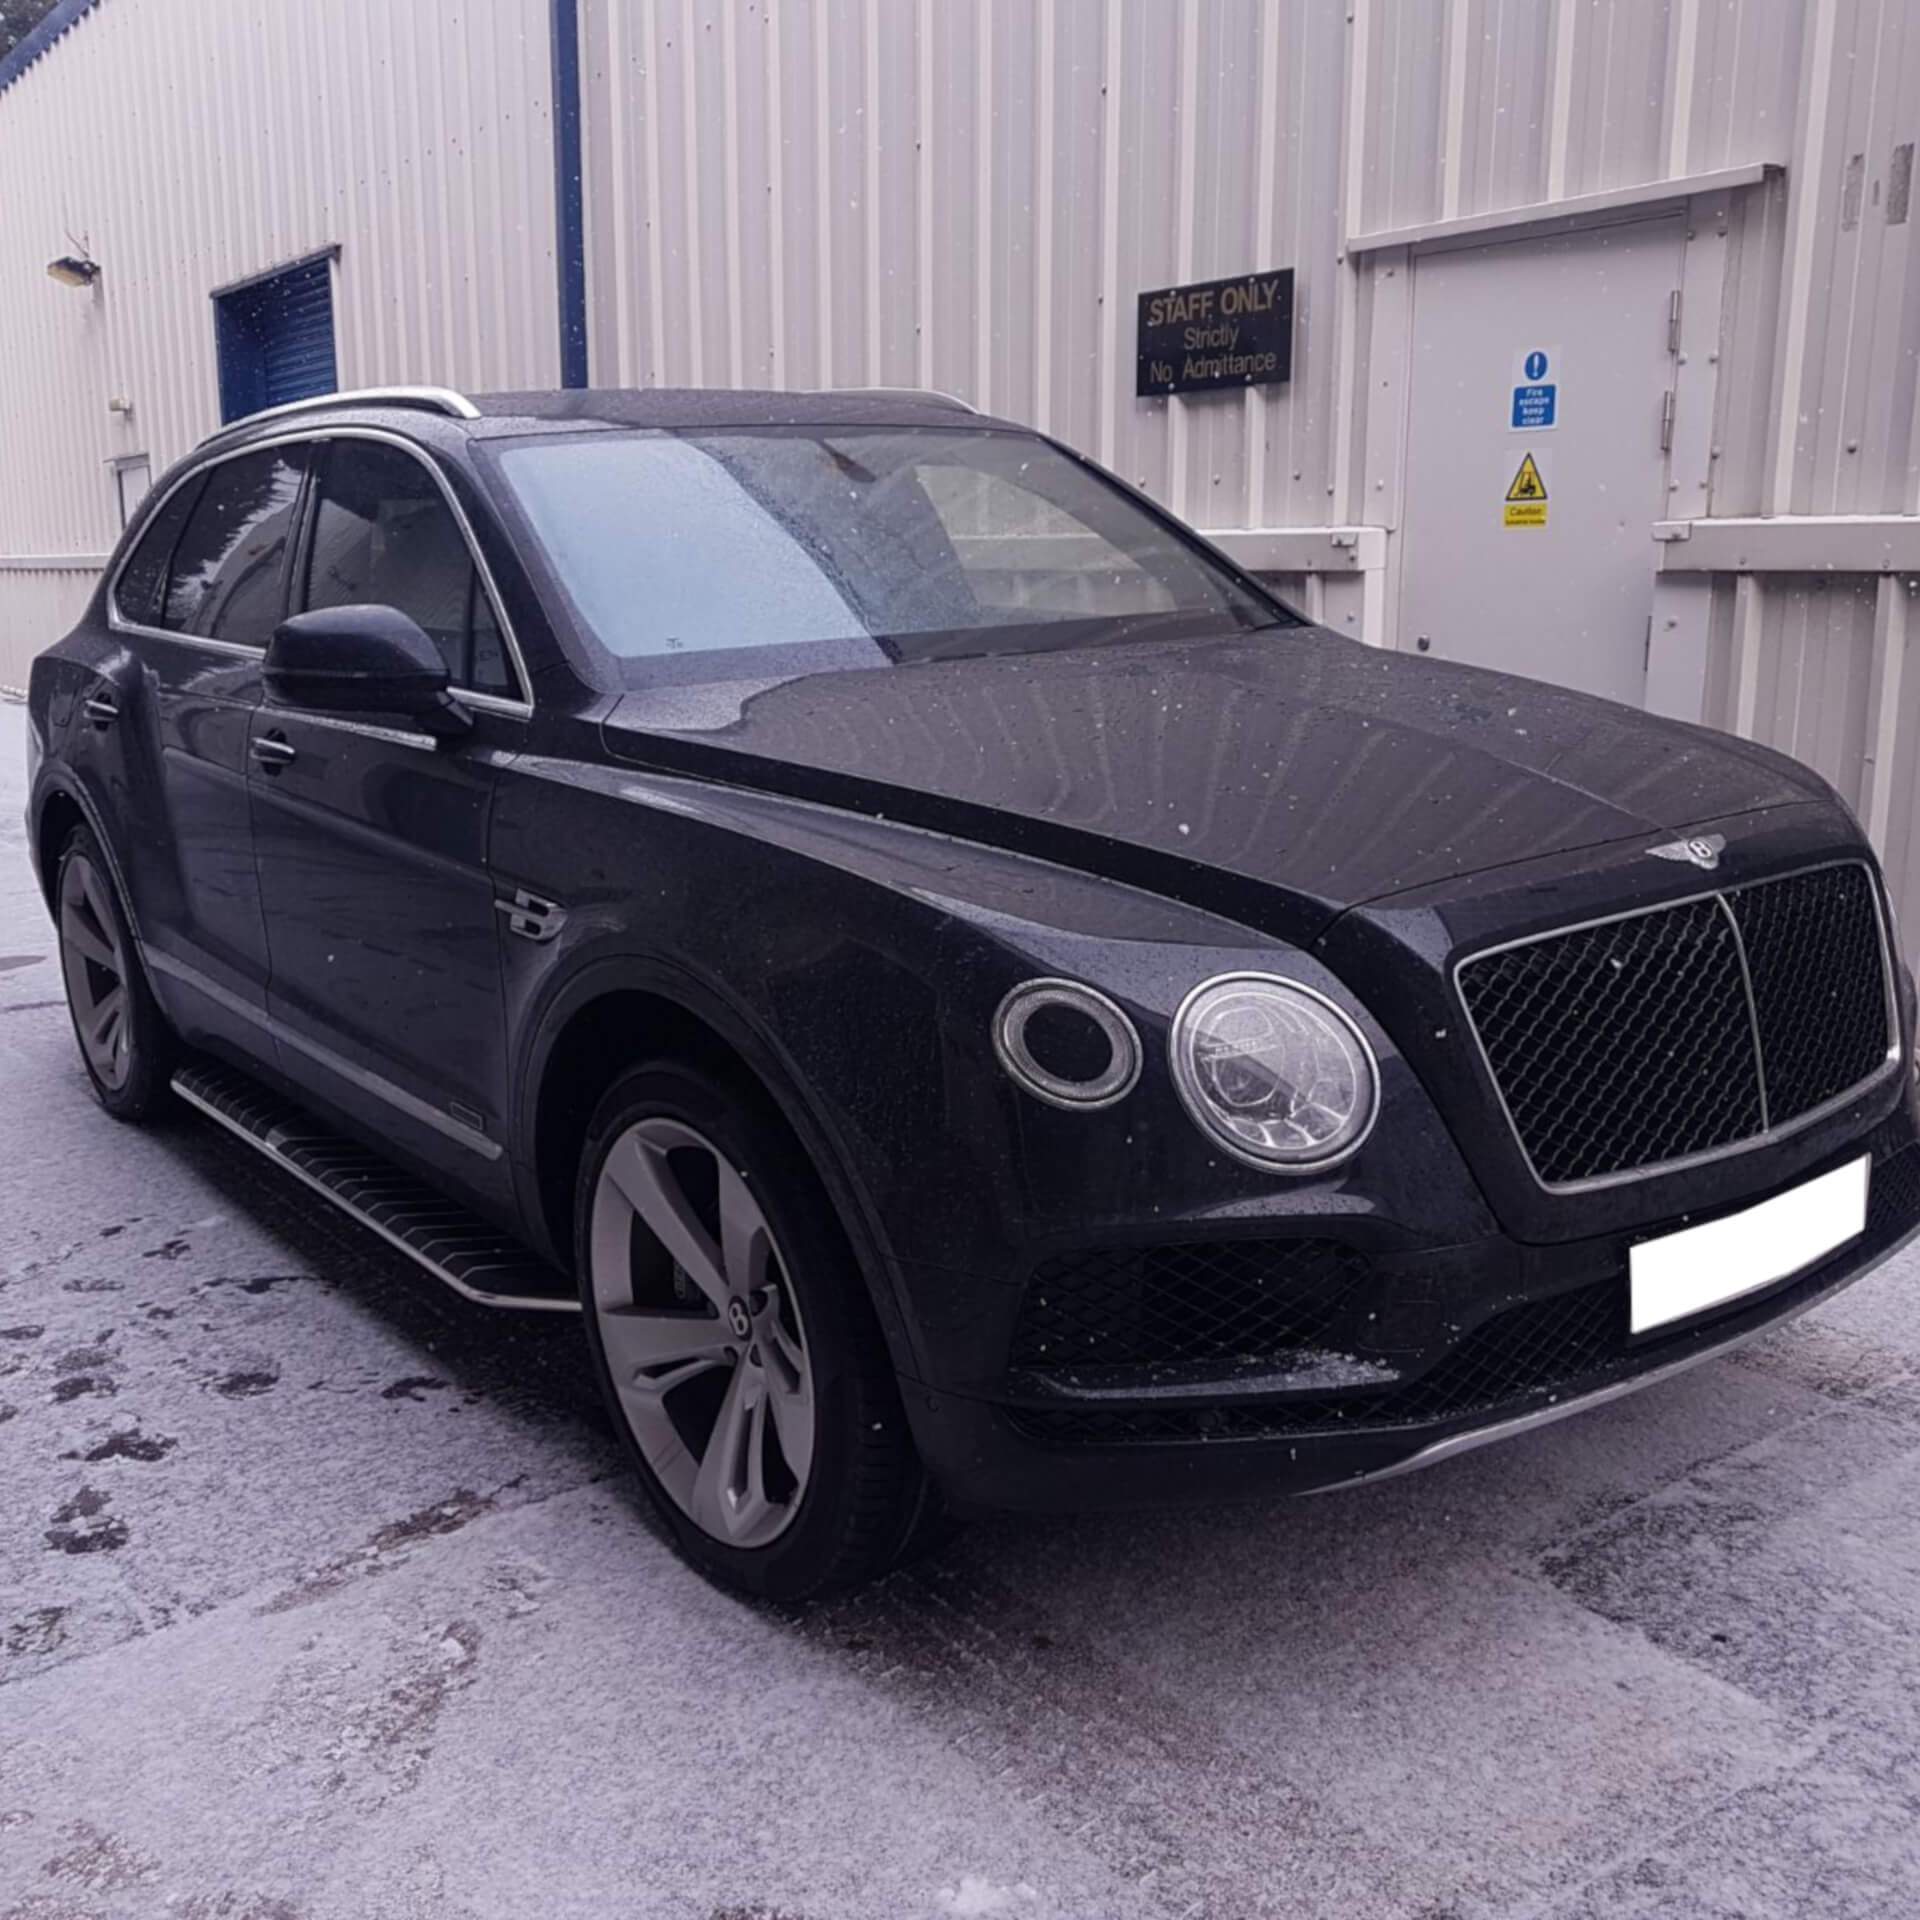 Direct4x4 luxury accessories for Bentley Bentayga vehicles with a photo of a black Bentley Bentayga in the snow at our depot